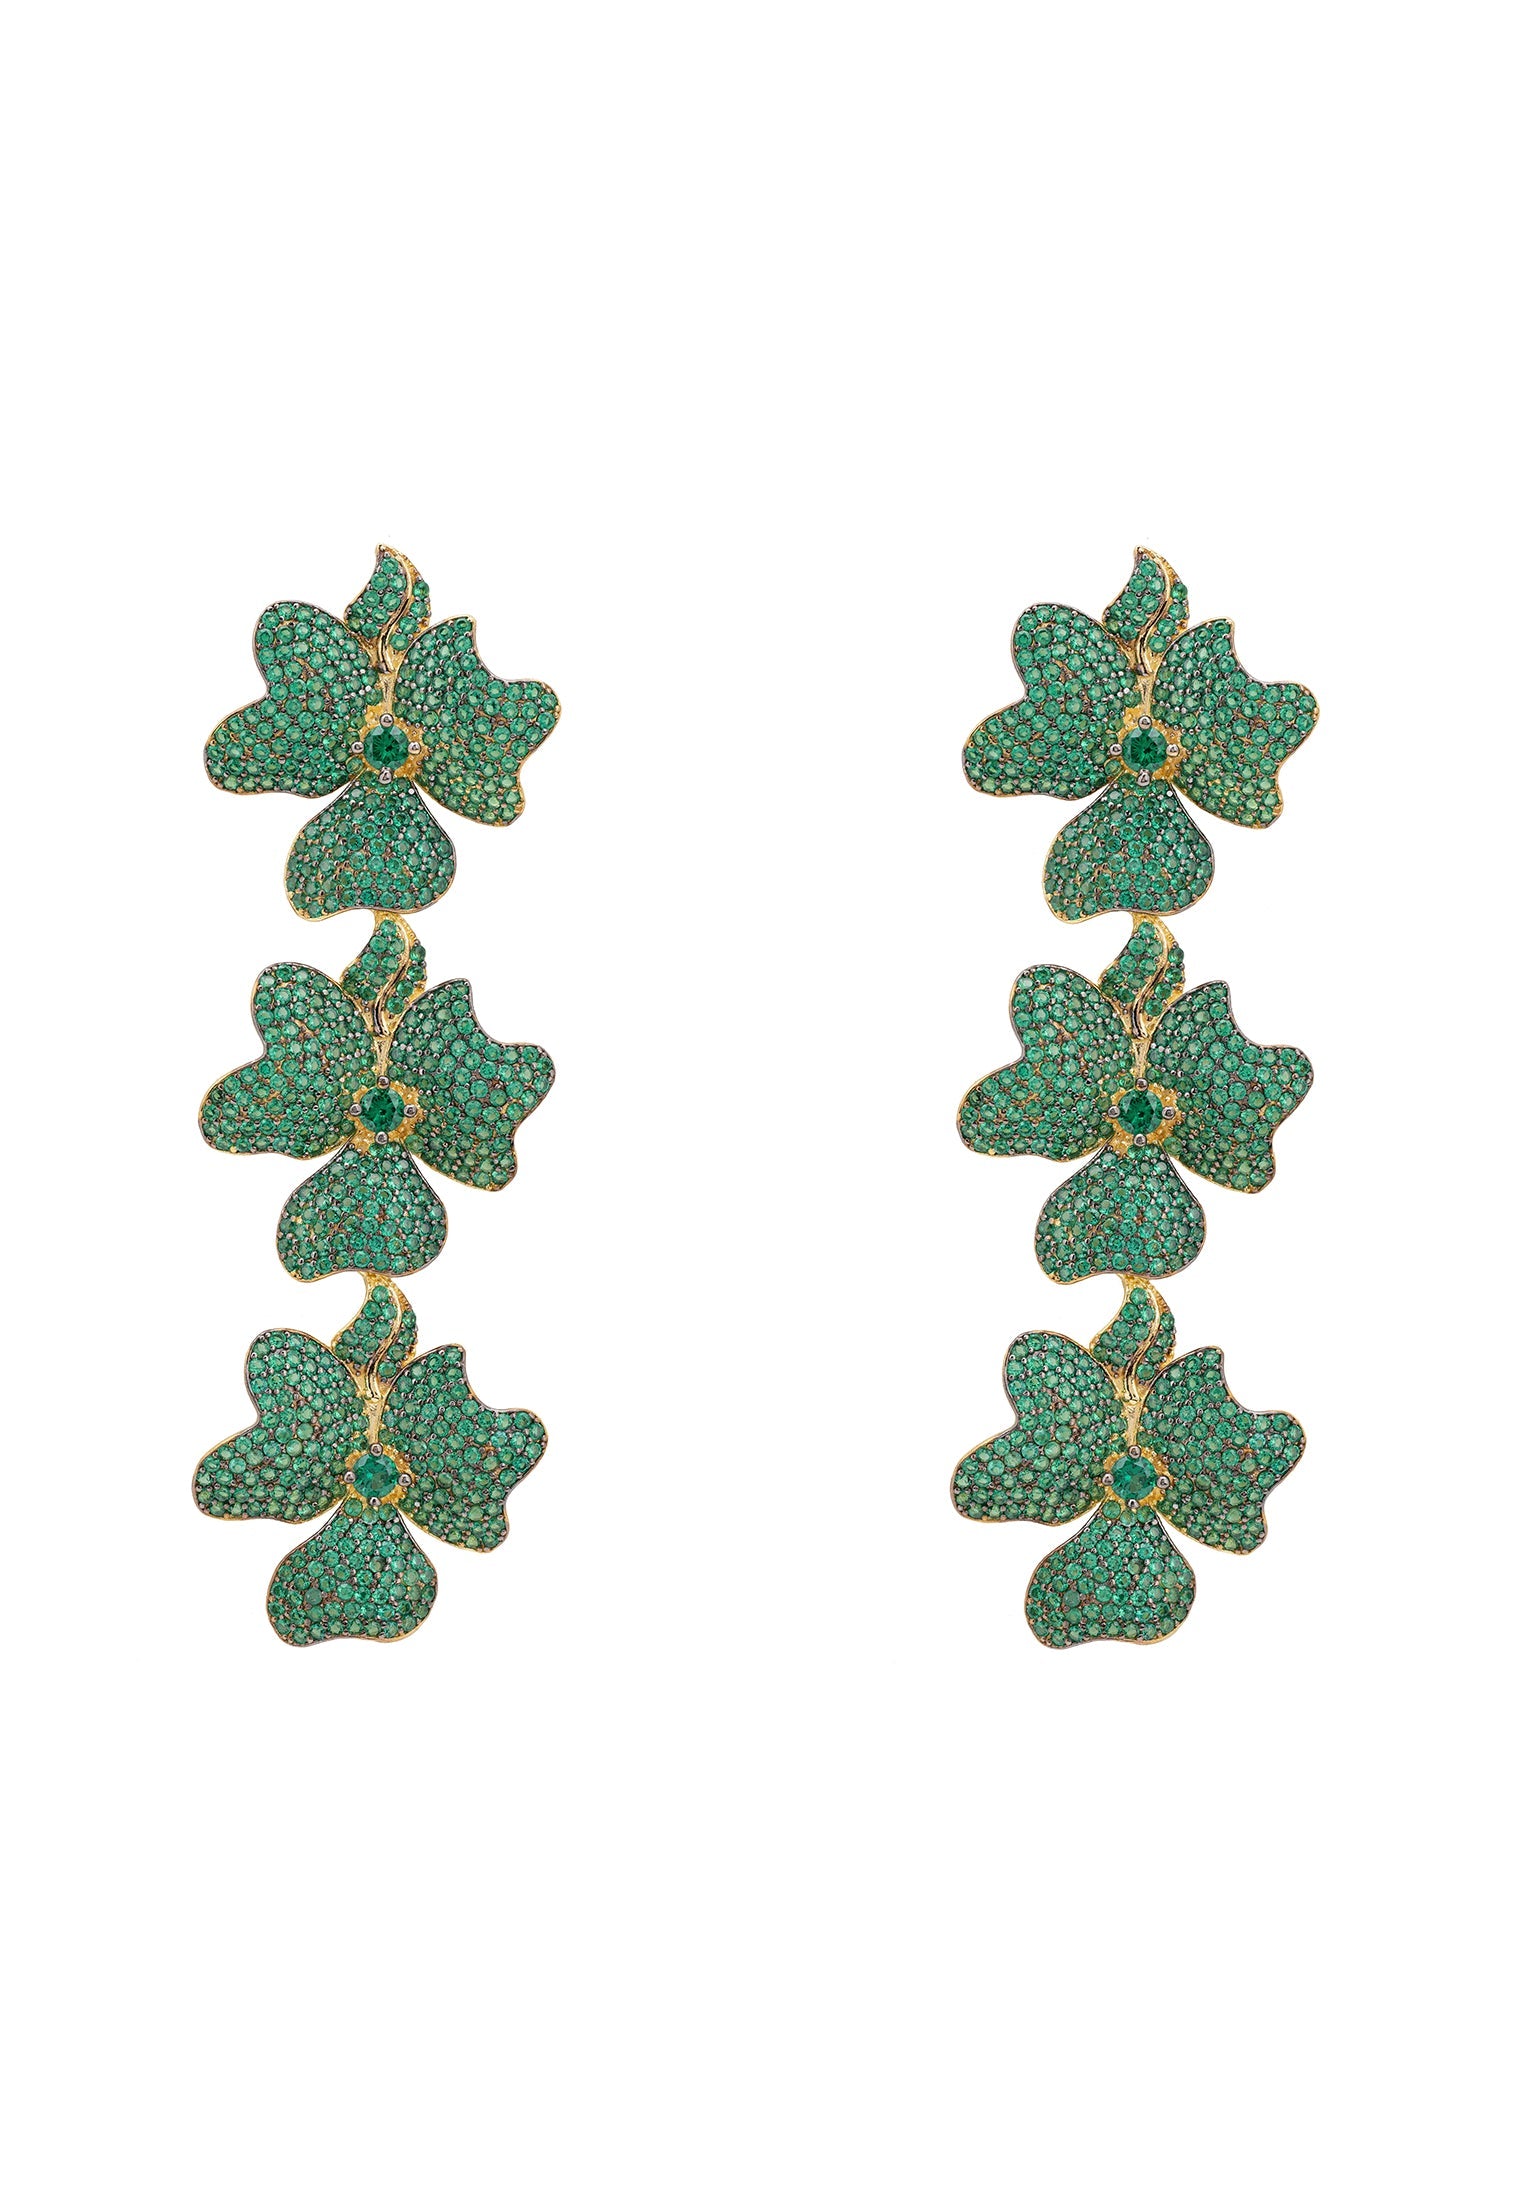 Gold Triple Drop Flower Earrings with Emerald Green Cubic Zirconia - Perfect for Weddings and Black Tie Events - Jewelry & Watches - Bijou Her -  -  - 